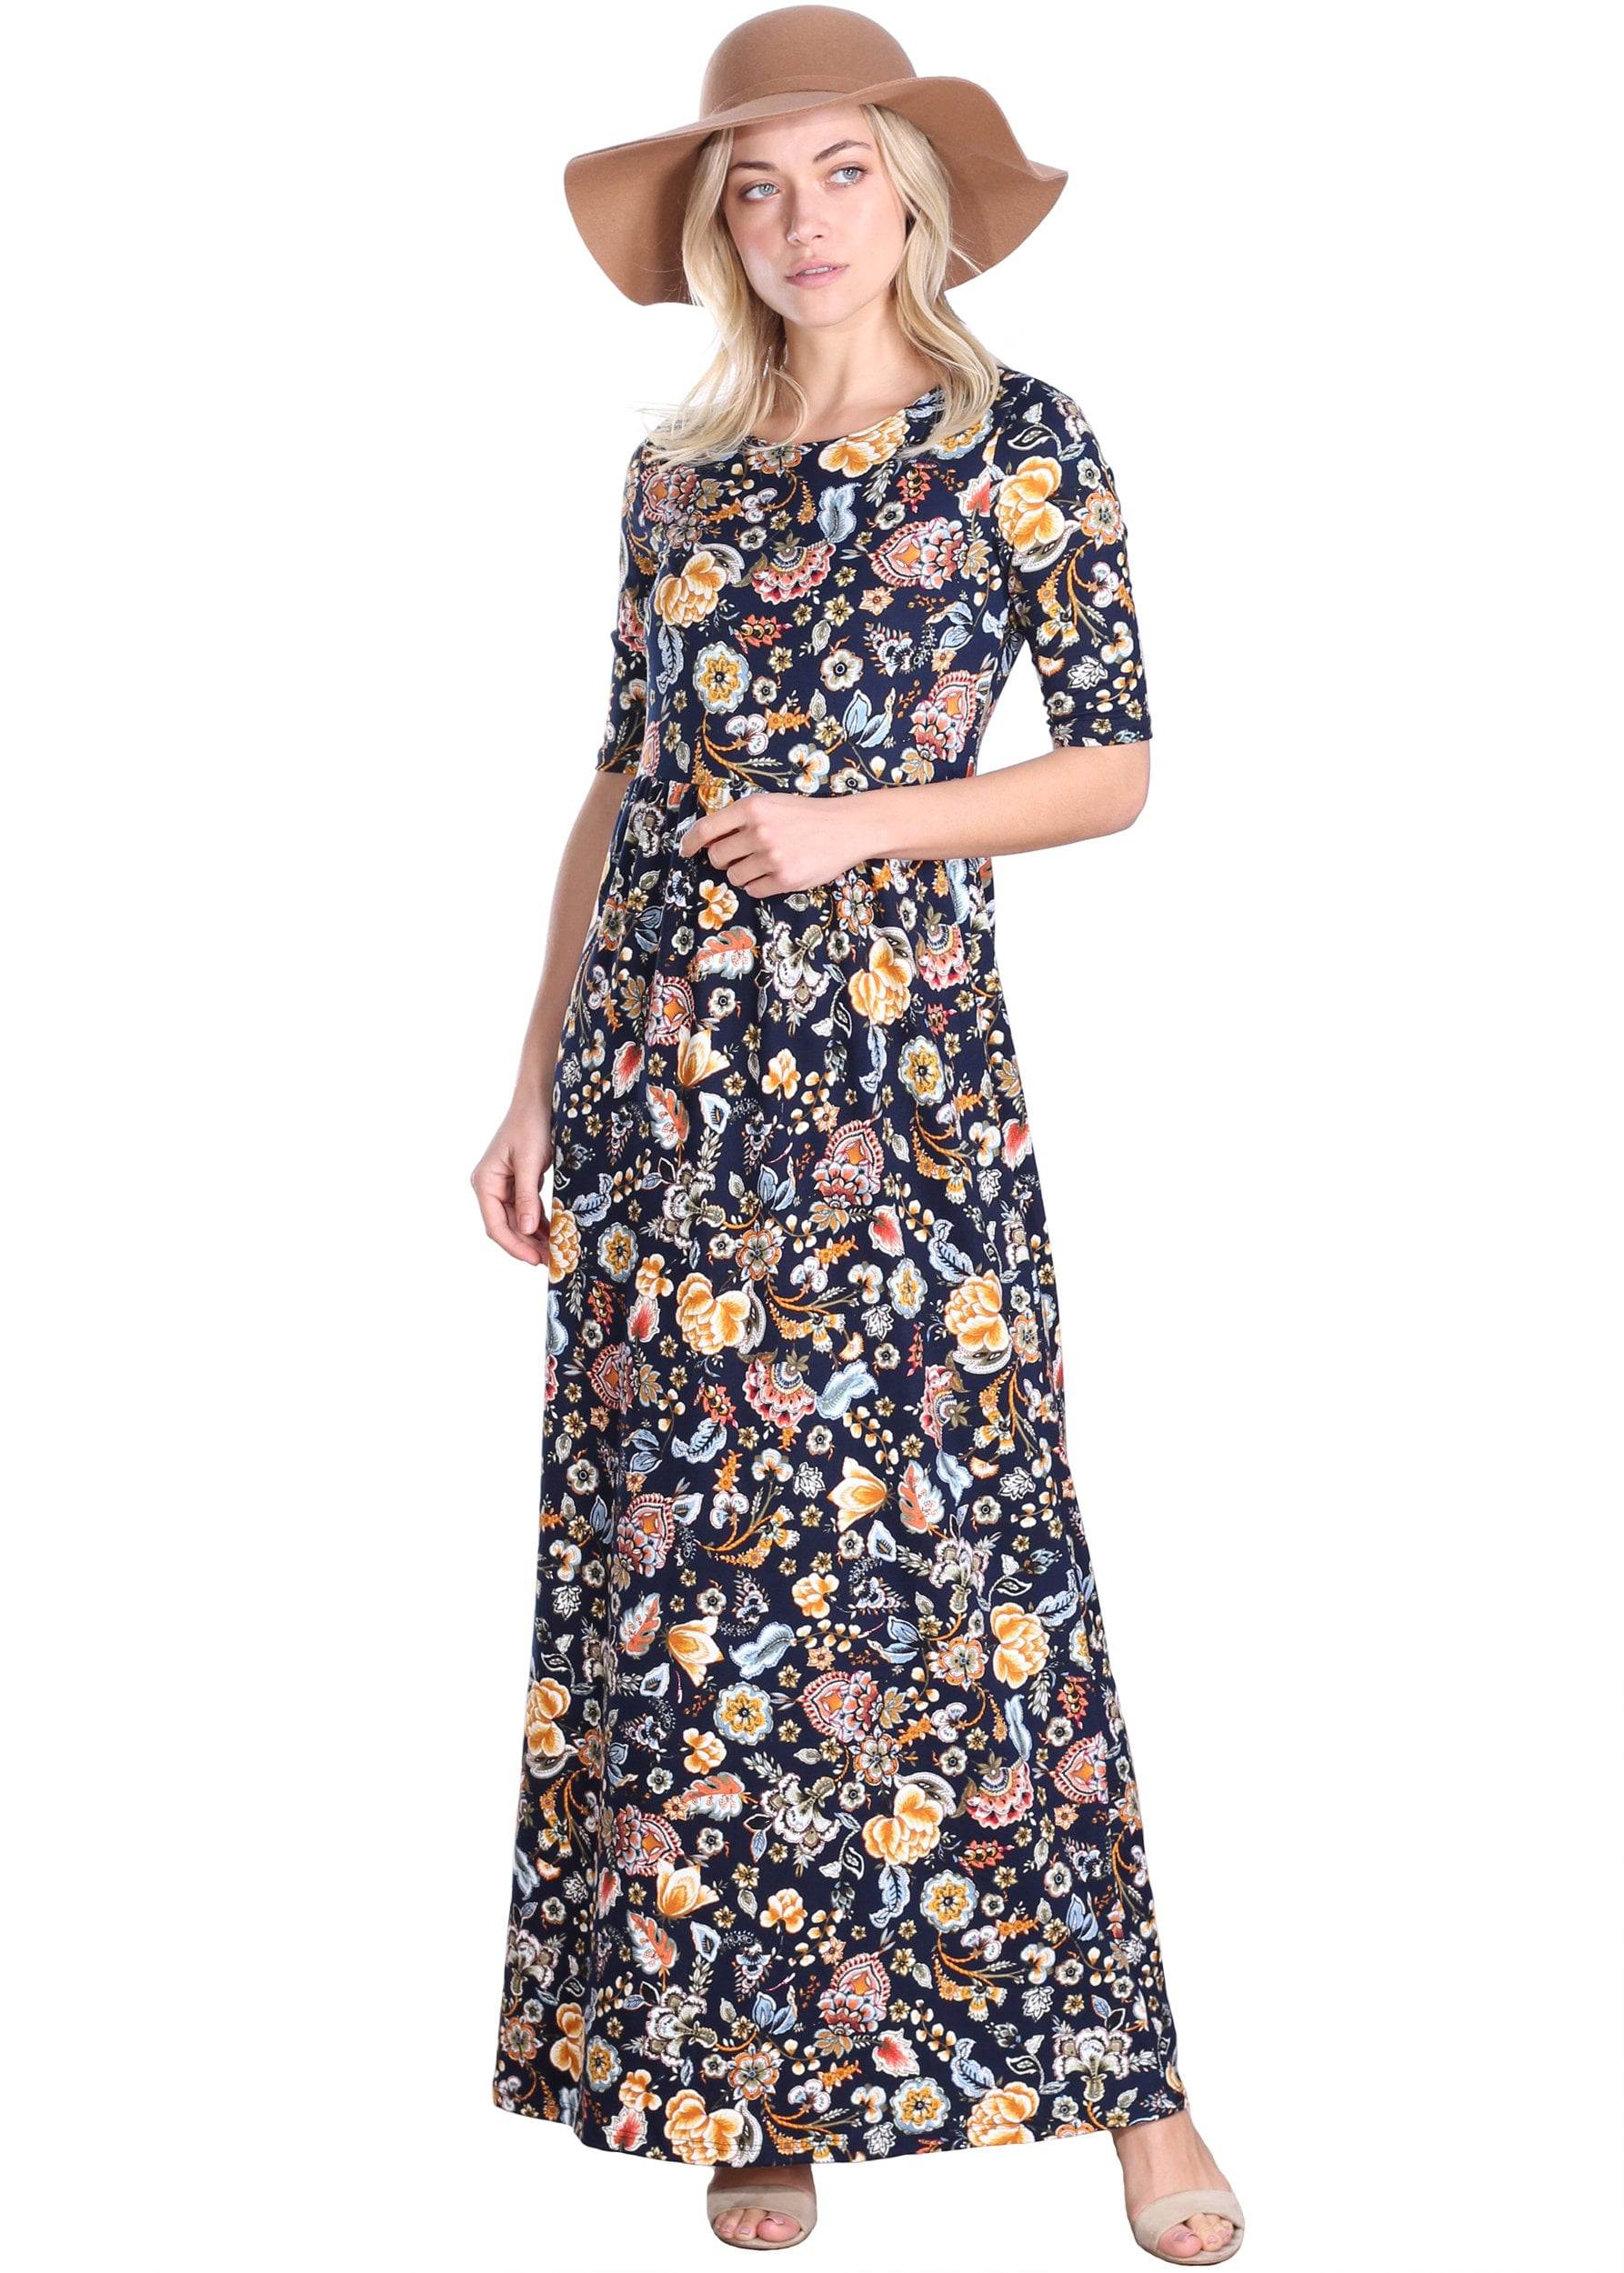 CUT & PASTE - Women's 3/4 Sleeve Printed Maxi Dress, DT18 - Made in USA ...